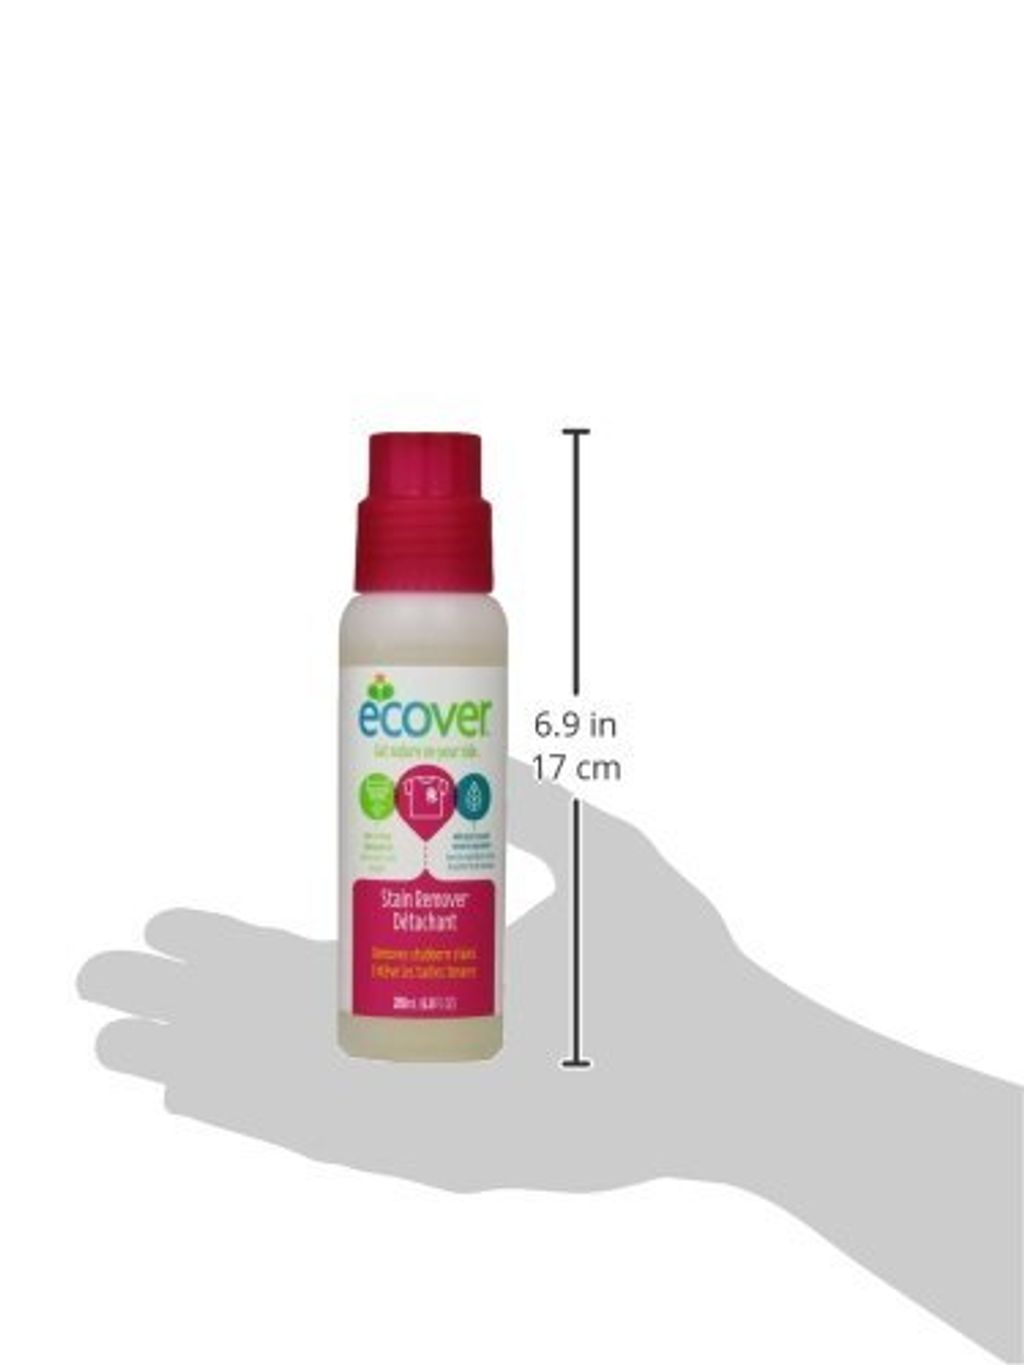 ecover stain remover size.jpg